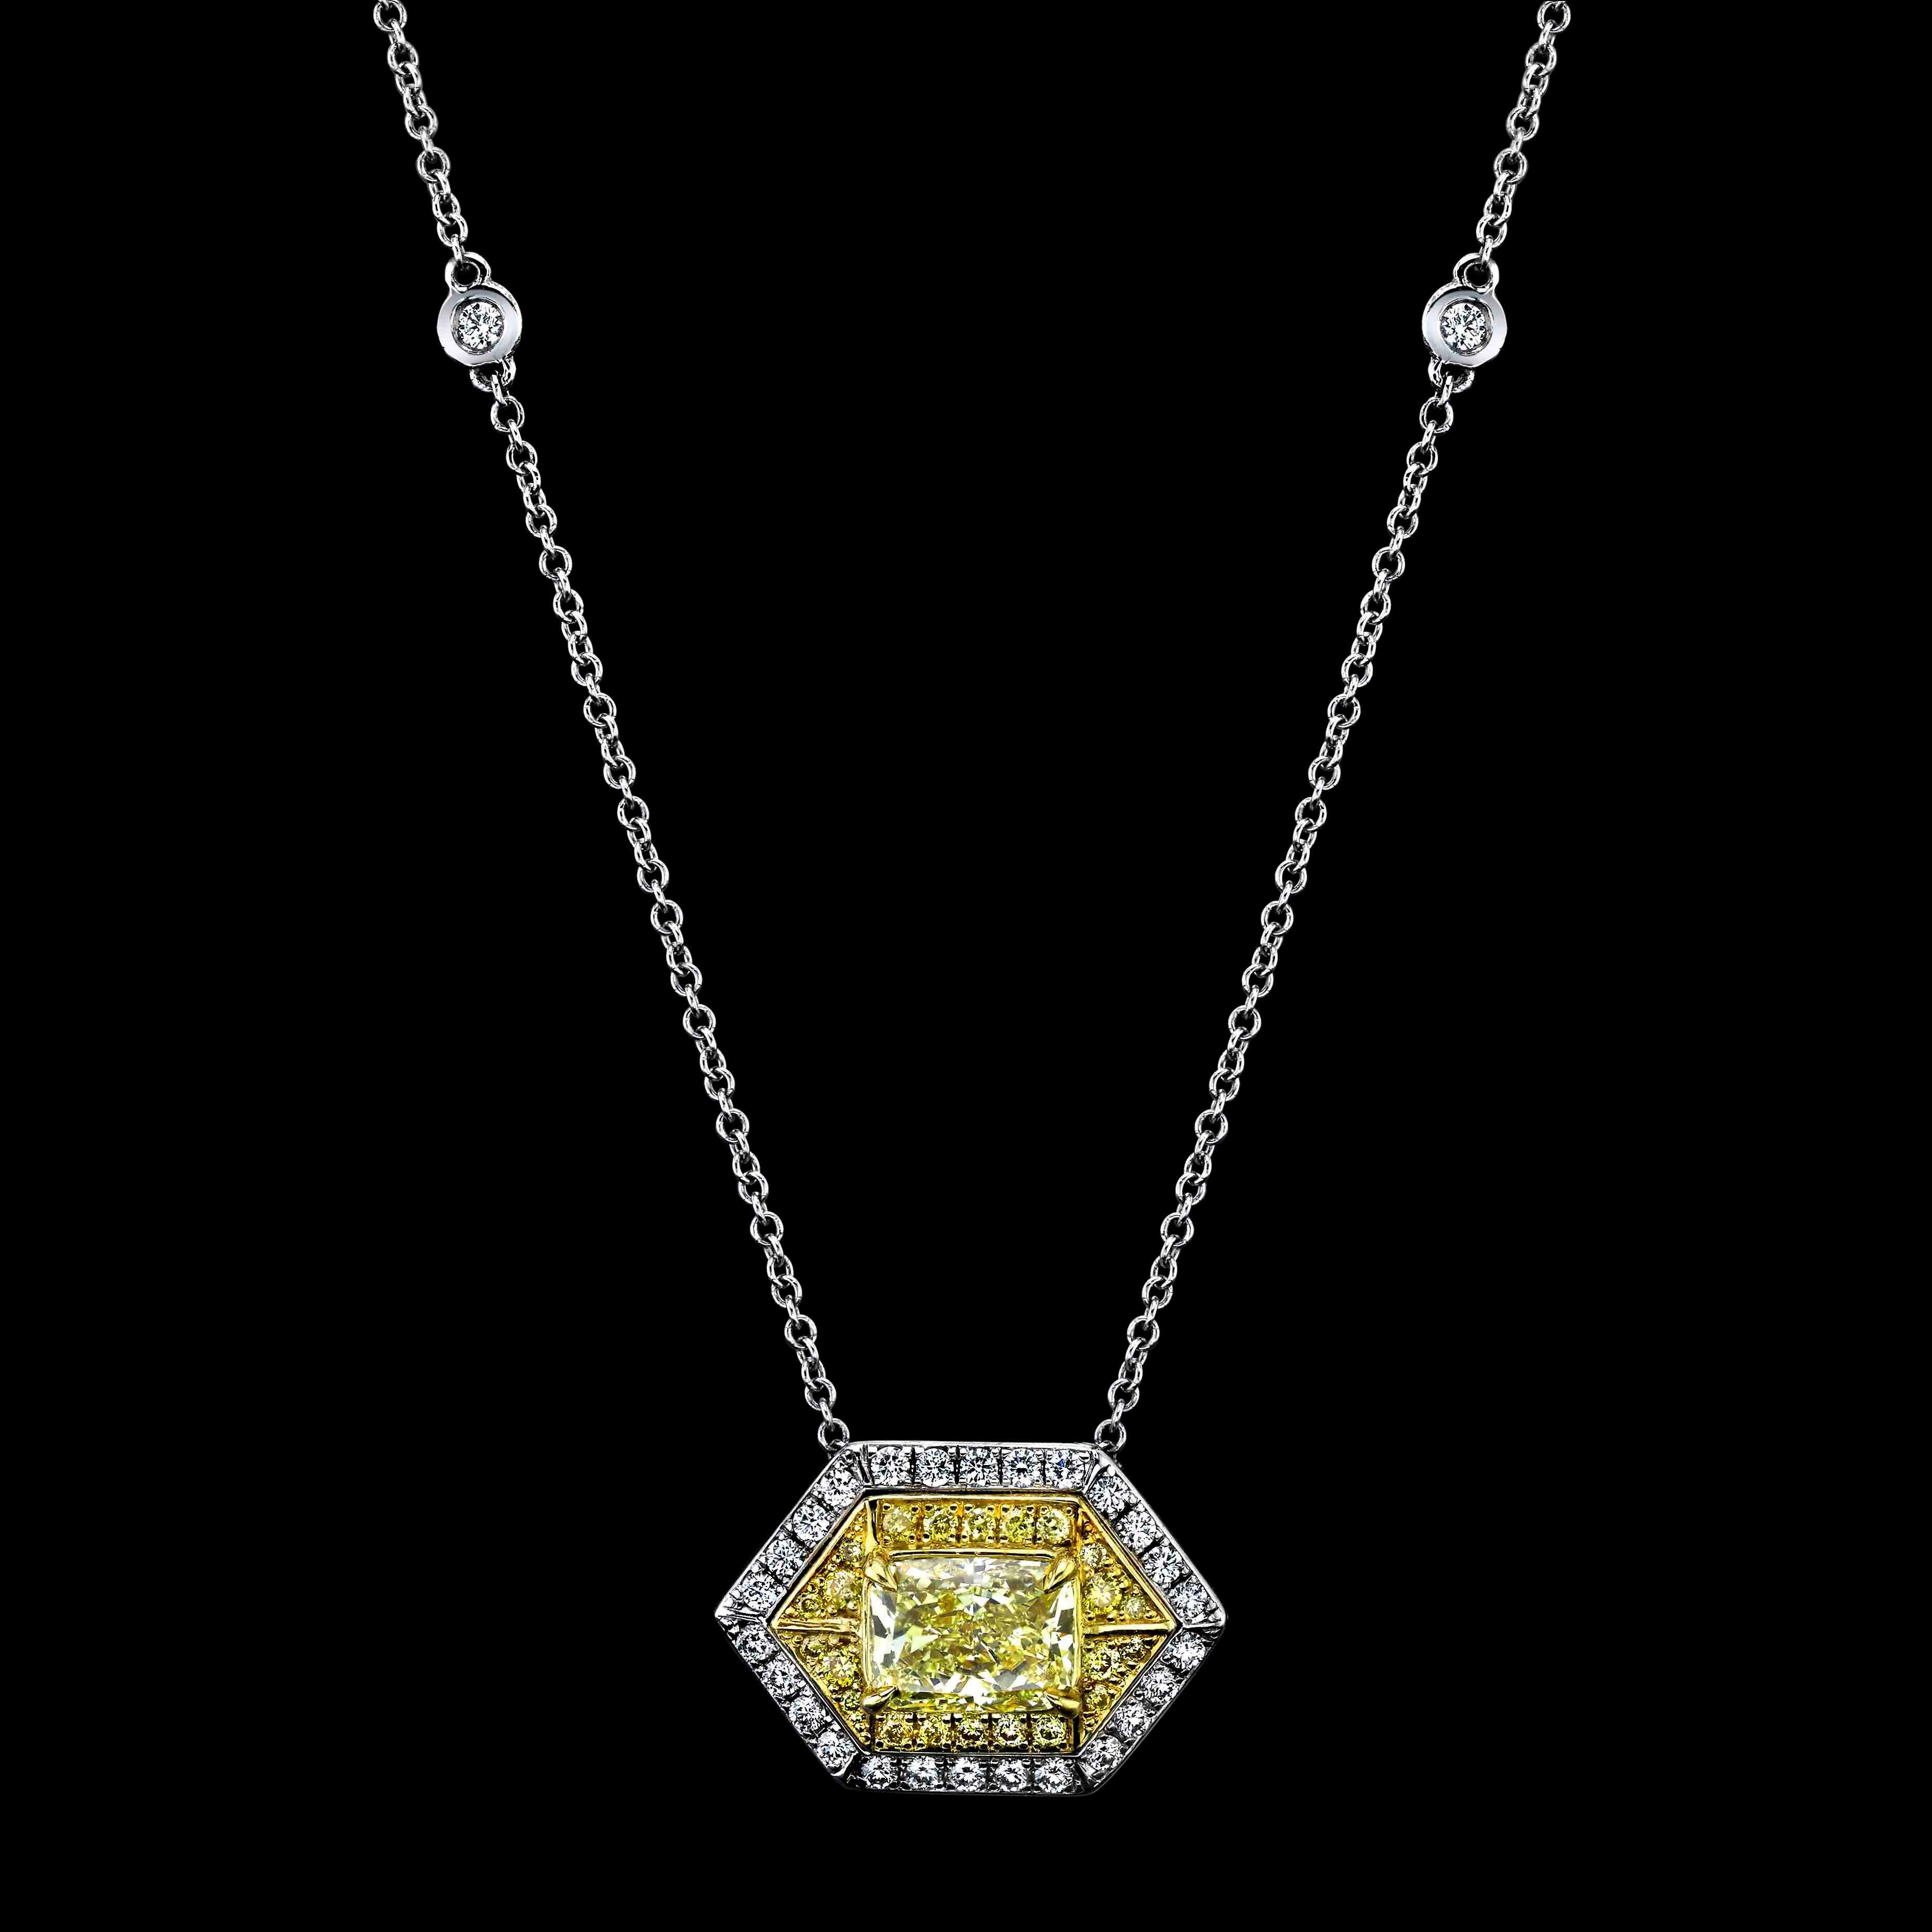 This dainty Cushion cut yellow Diamond is graded by GIA as Fancy Intense. 
It is set in 18k White and Yellow Gold Surrounded by:

22 Yellow diamonds = 0.12cttw

And 27 Round colorless Diamonds = 0.20cttw

and 6 Round Diamonds on-chain =